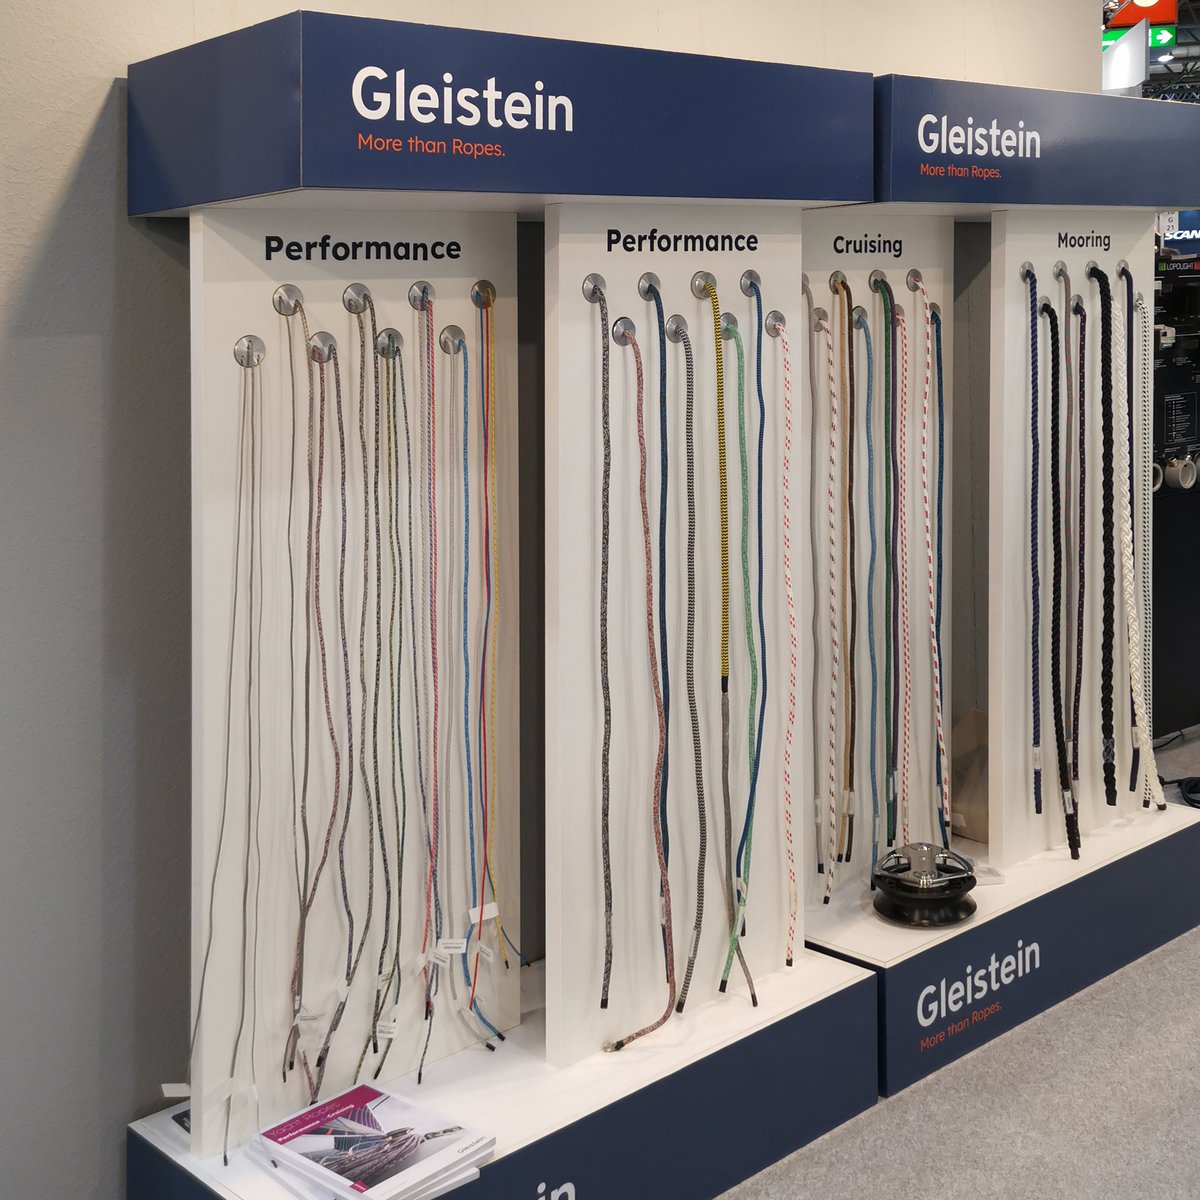 Great days await us at boot - with splicing courses and many good conversations. Visit us at the Lindemann booth in Hall 10, stand C76, and the Frisch booth in Hall 10, stand H21.
#Gleistein
#Ropes
#boot2023
#bootduesseldorf
#bootdüsseldorf
#LifeOnWater
#Sailing
#MarineEquipment